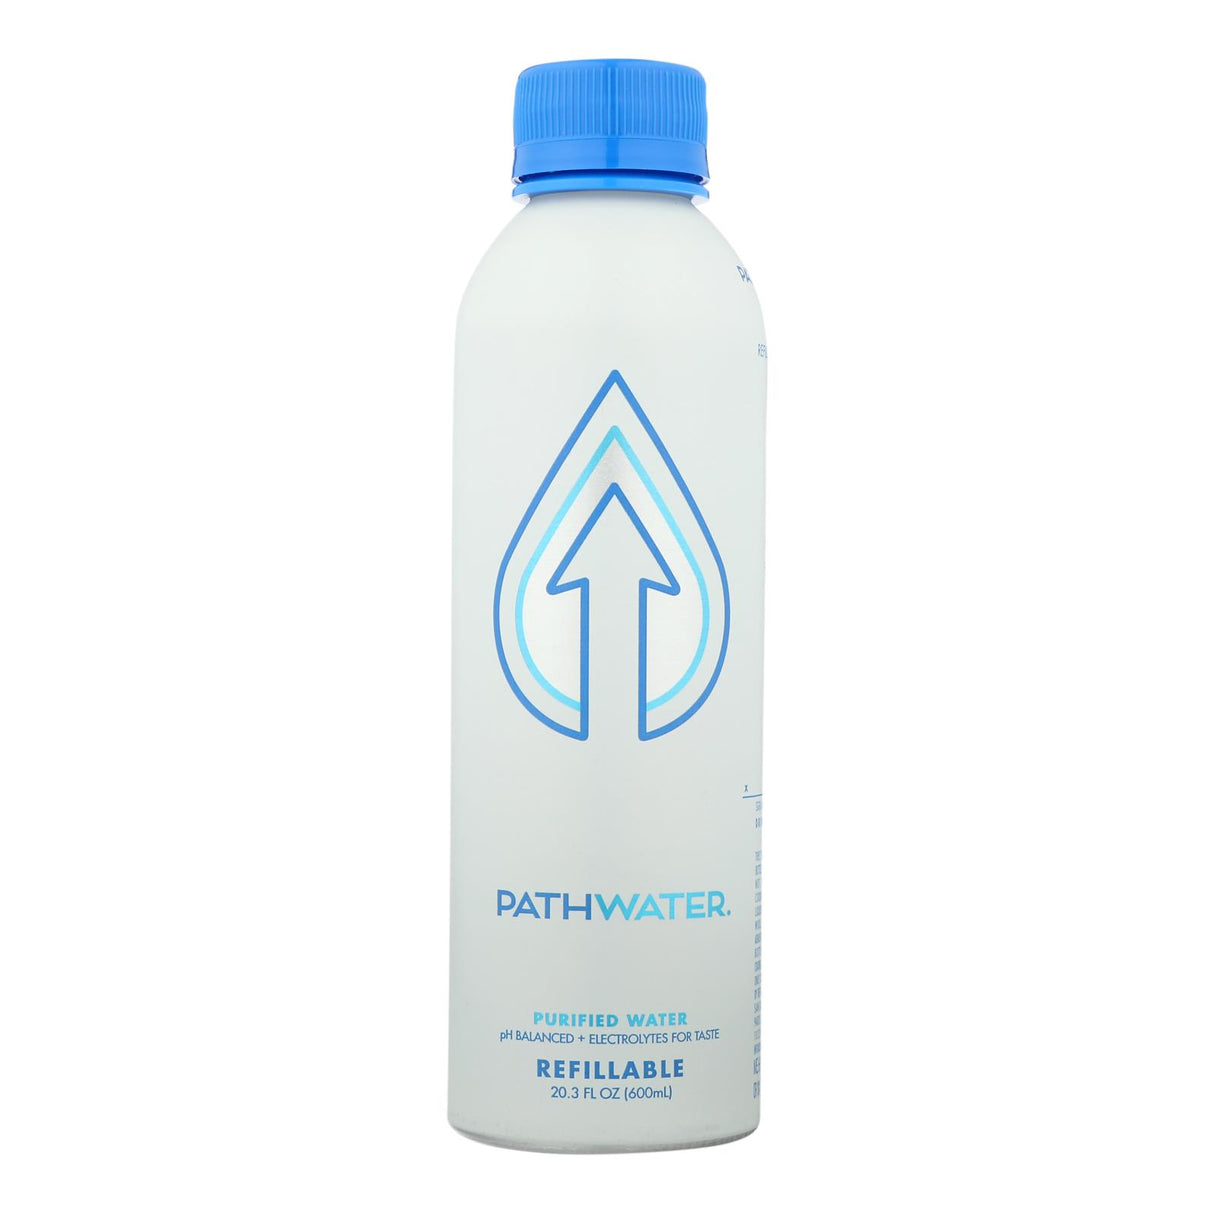 Pathwater Purified Water: Refreshment on-the-Go in Reusable Bottles (12 x 20.3 fl oz) - Cozy Farm 